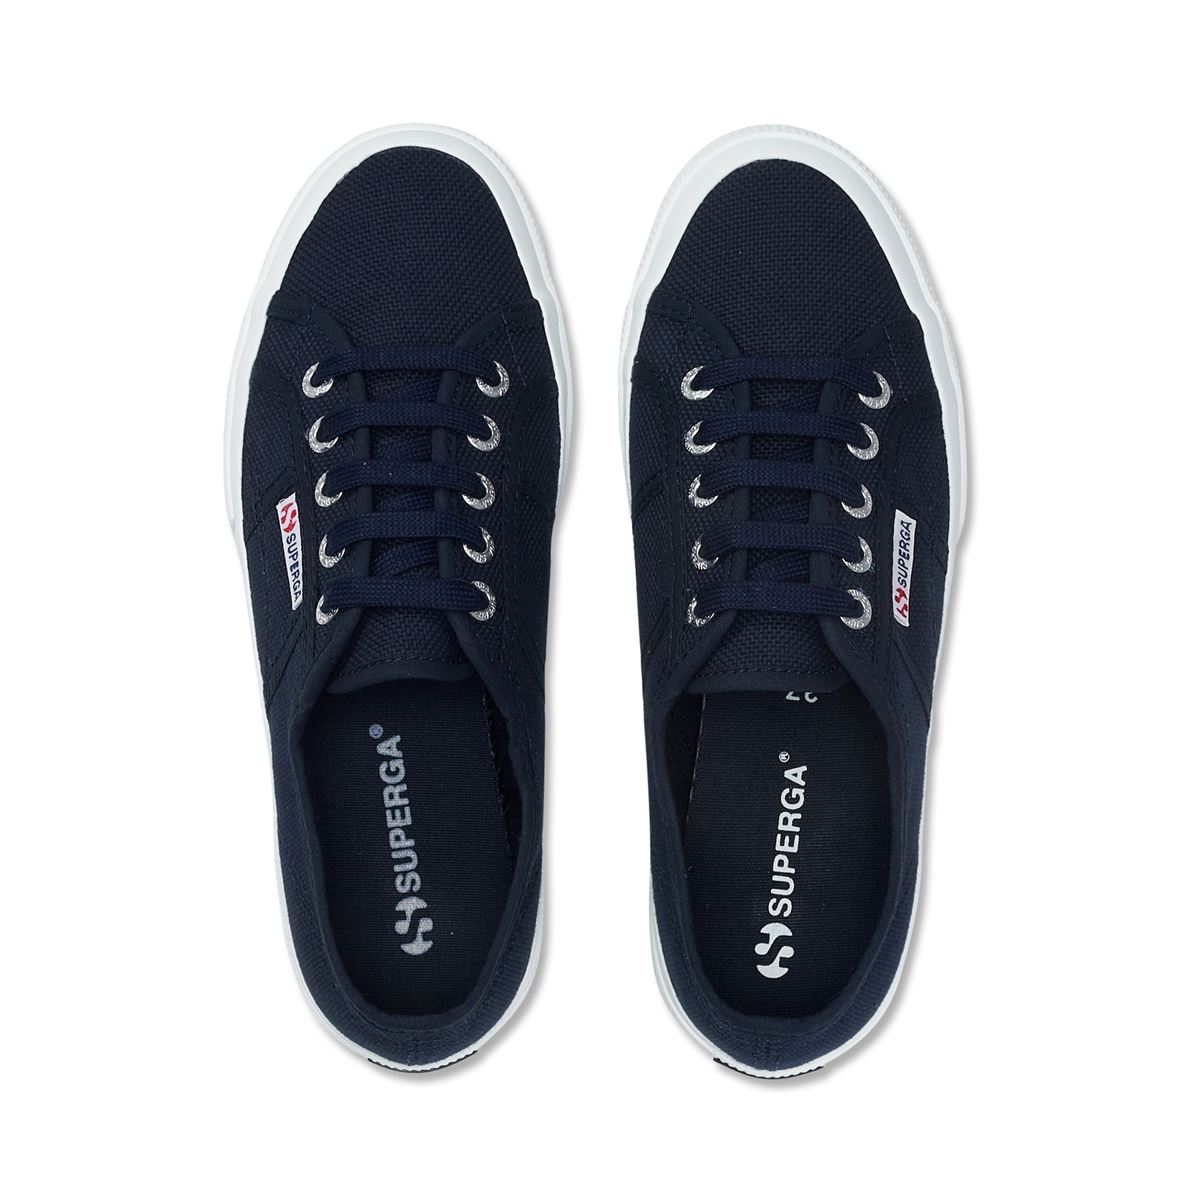 navy blue canvas sneakers with white rubber outer sole top view